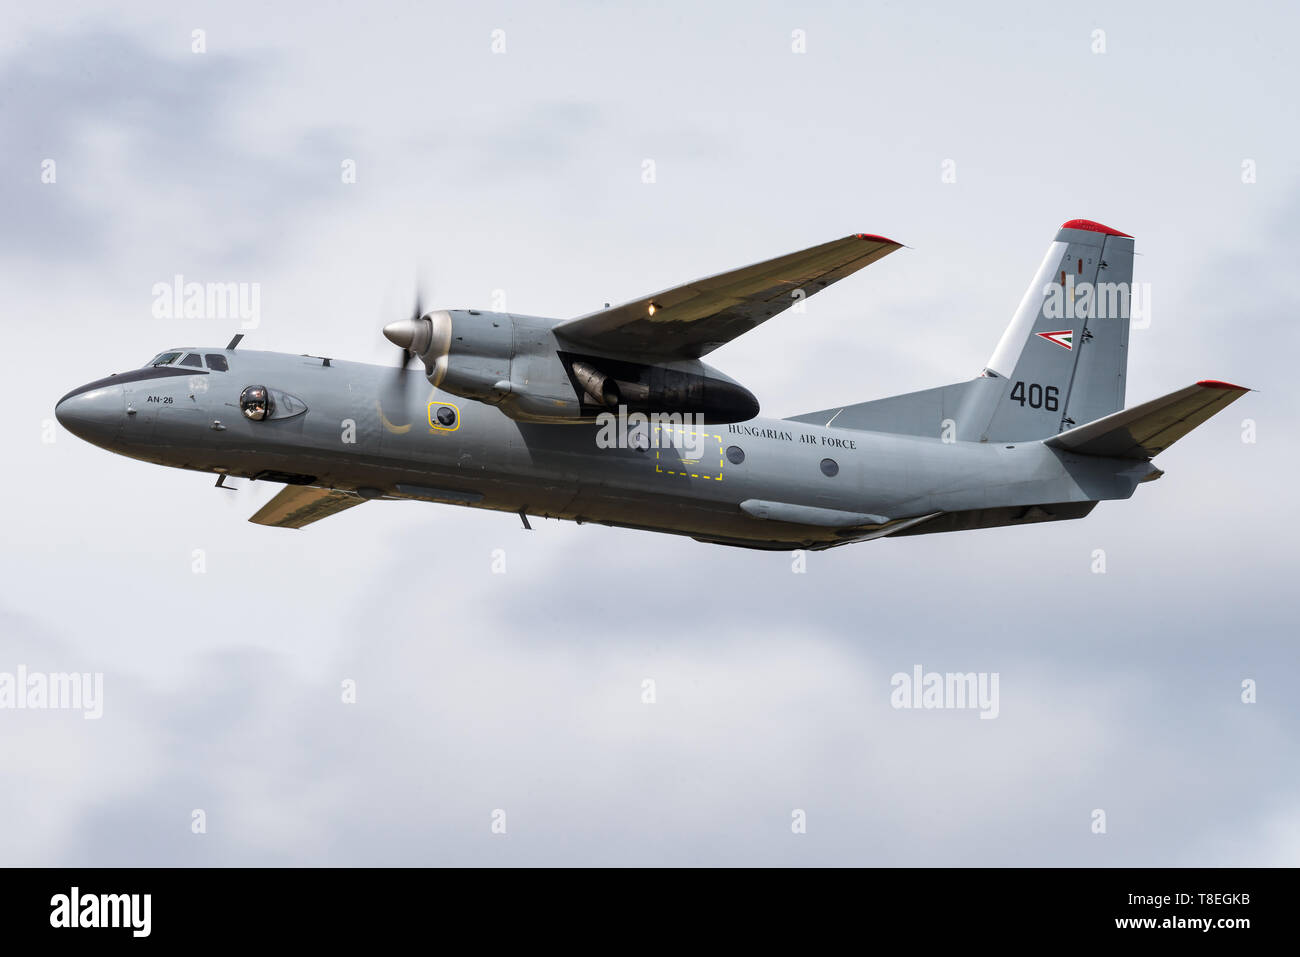 An Antonov An-26 twin-engined turboprop military transport aircraft of the Hungarian Air Force. Stock Photo